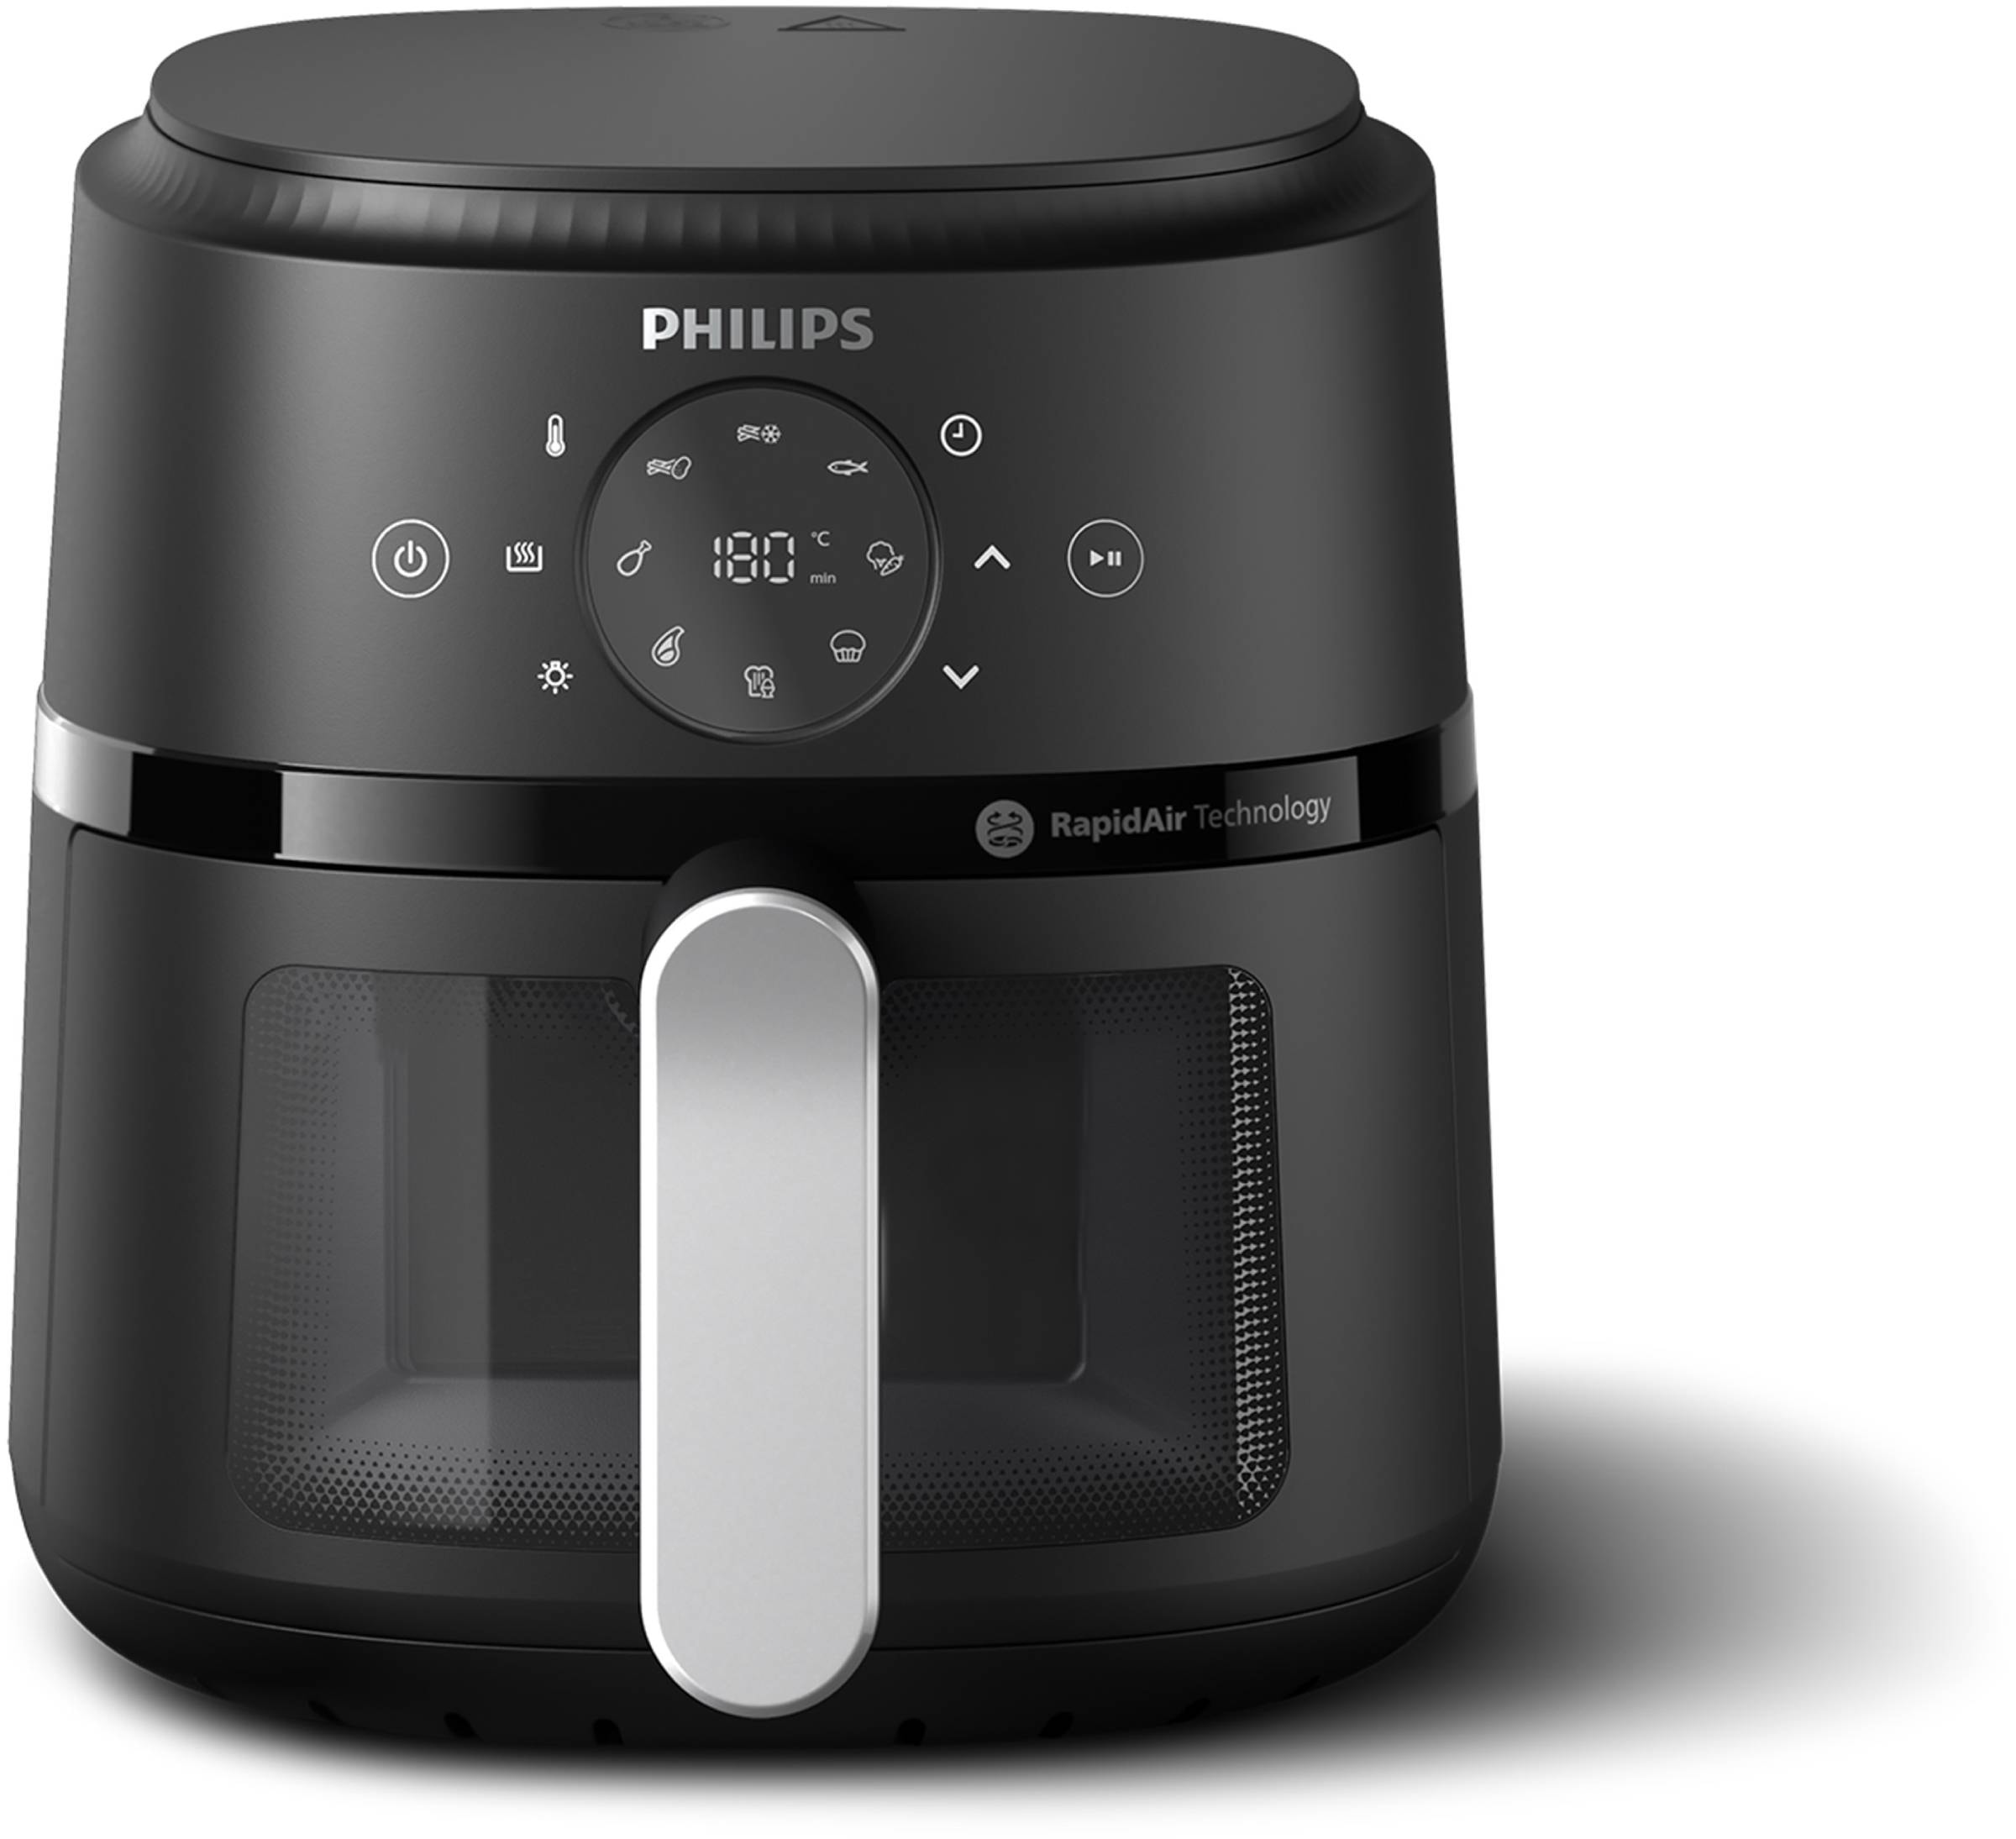 PHILIPS Friteuse à air chaud   NA211/00